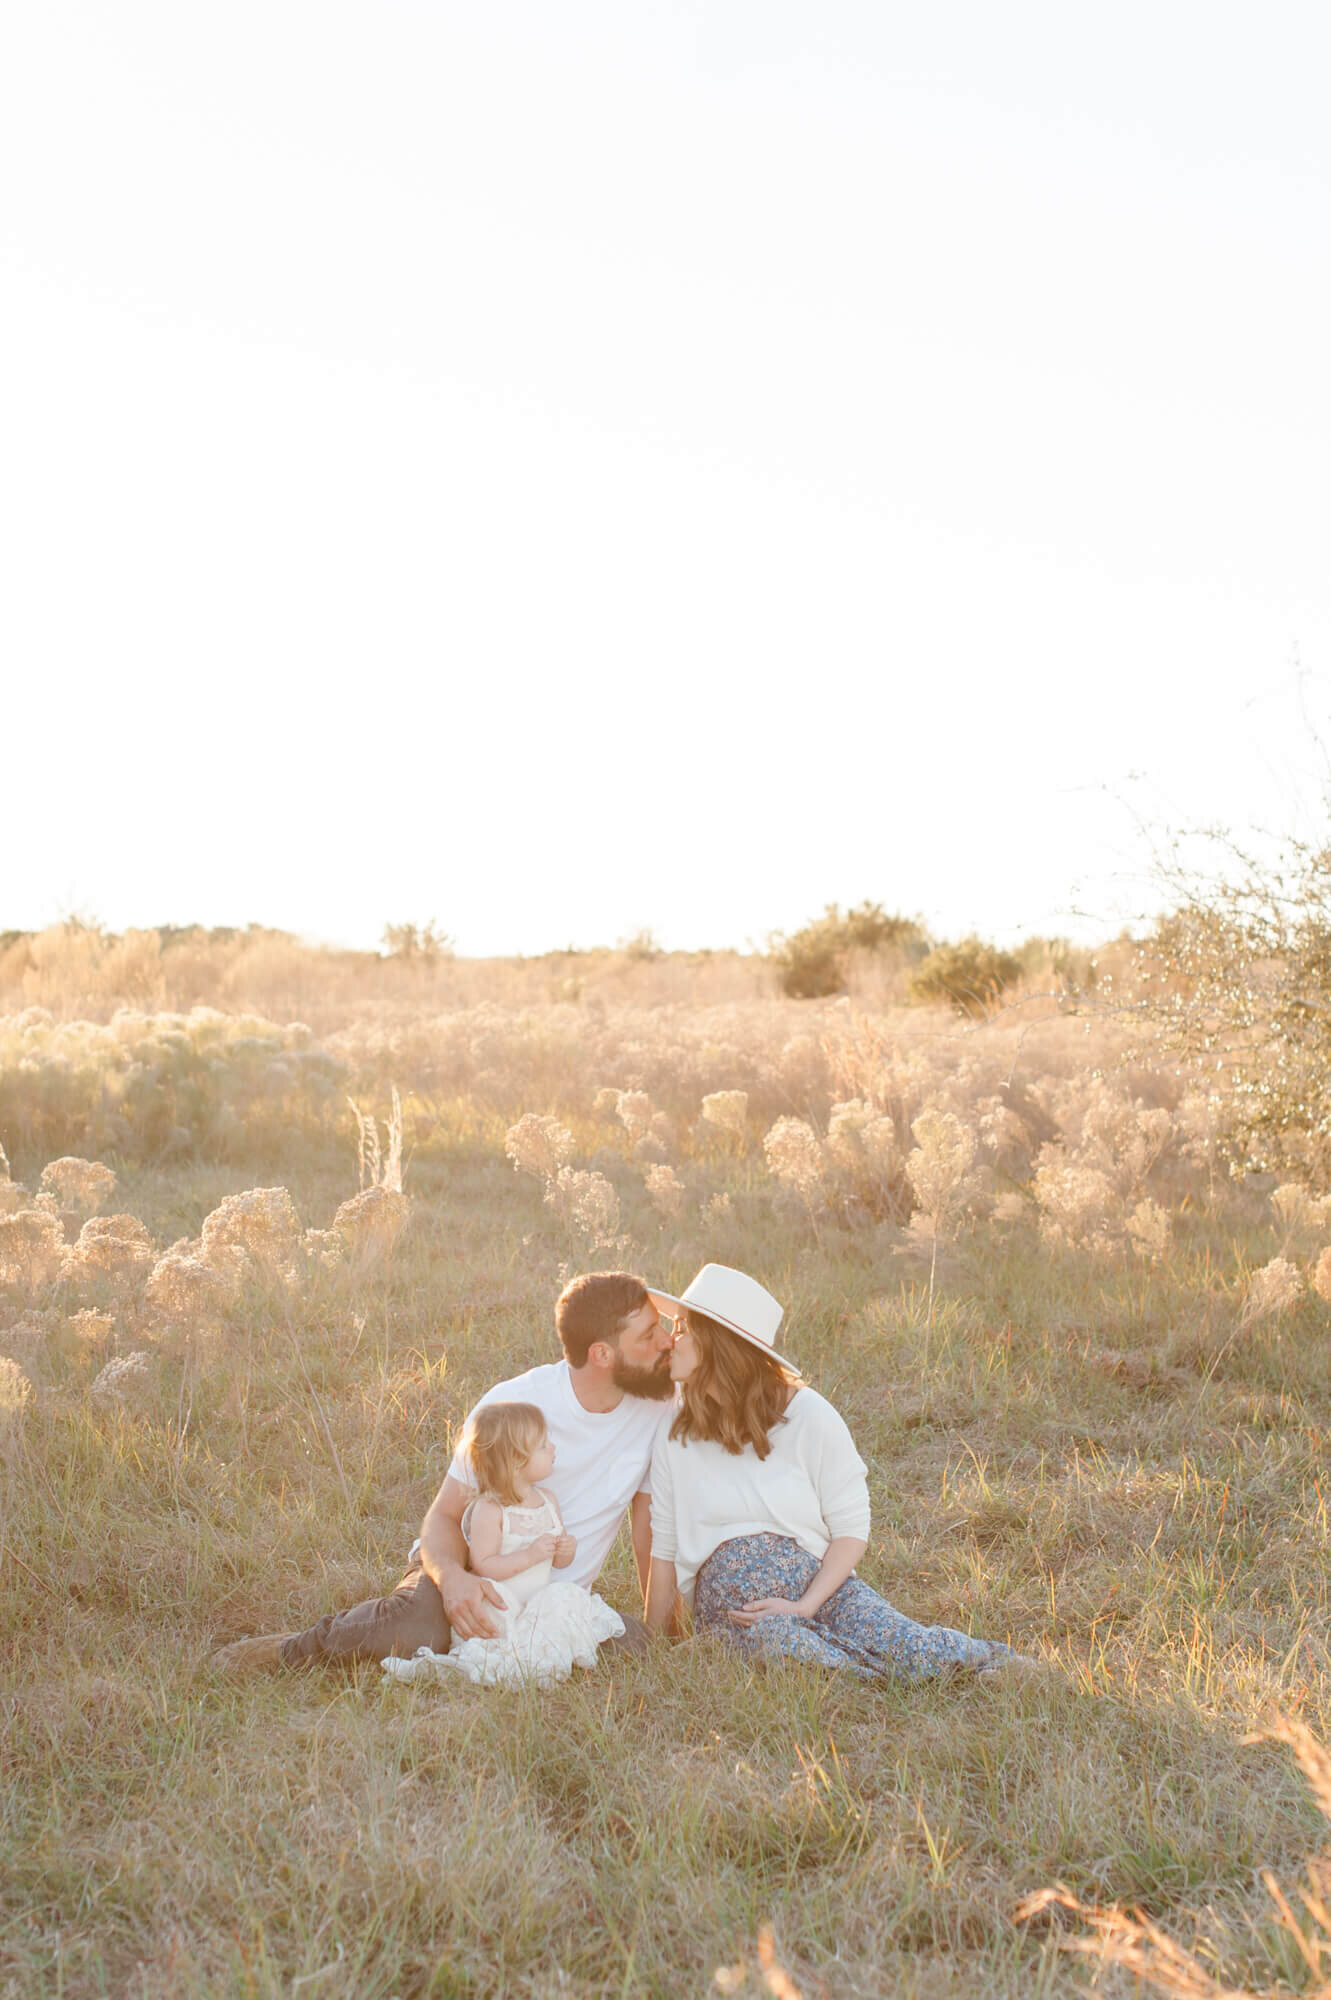 Cocoa Beach maternity photographer captures new parents kissing while sitting in a tall grass field at sunset